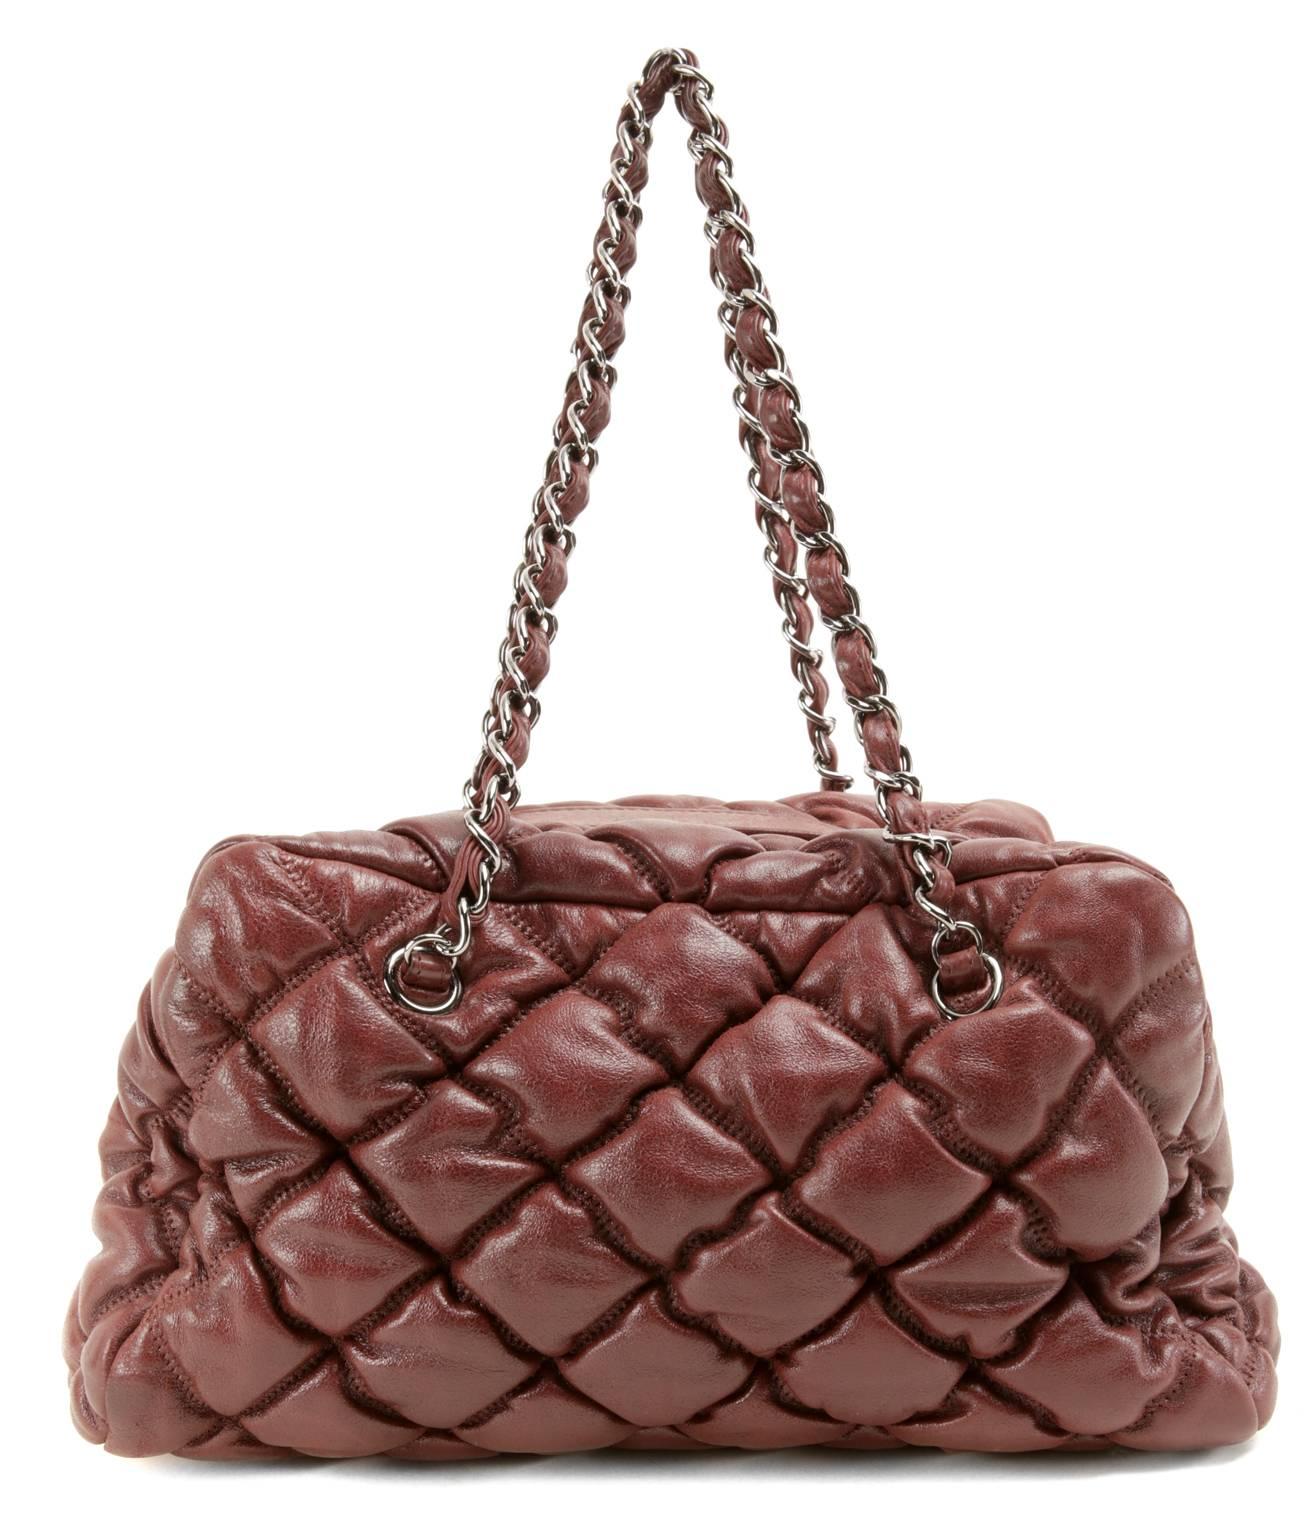 Chanel Wine Red Leather Bubble Bag- PRISTINE
  The striking color enhances the texture of the unique bubble quilting beautifully.  Roomy but not unwieldy, this piece is perfect for every day enjoyment.
 
Wine red leather is quilted in the extra